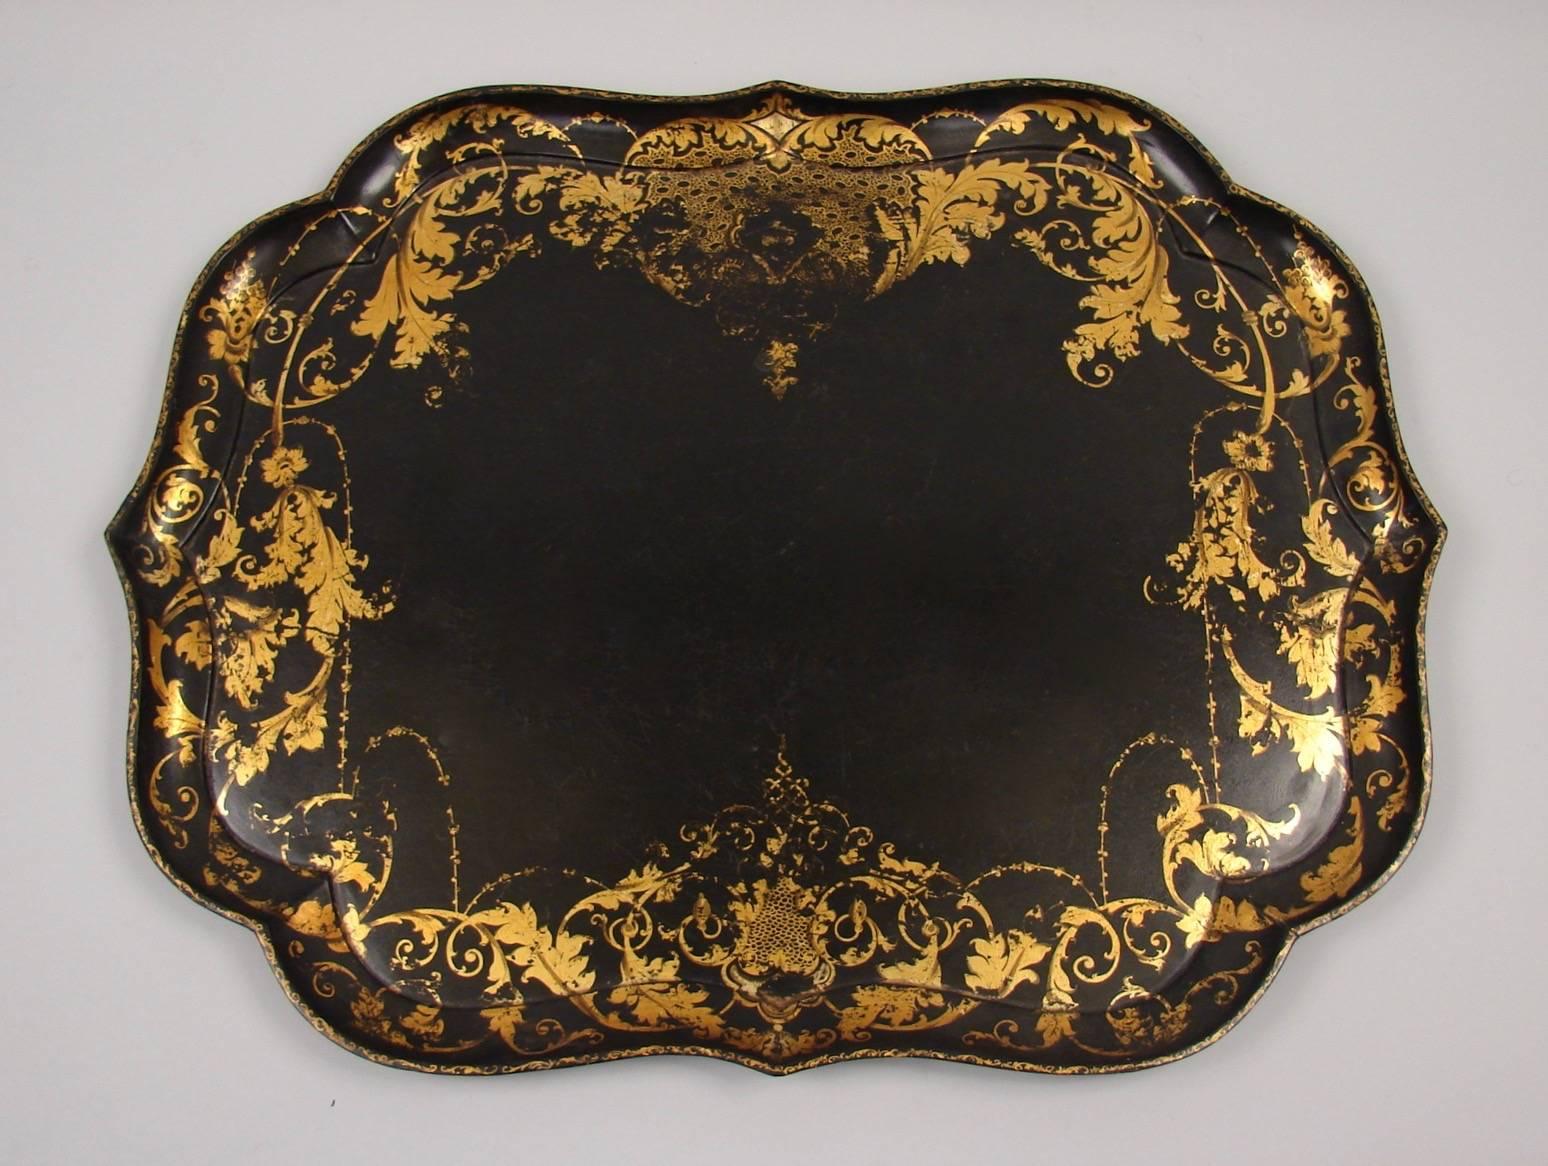 An English Victorian scalloped edge papier mache tray with foliate gilt perimeter decoration now mounted on a faux bamboo custom stand of a later date, 
circa 1860. Repolished.